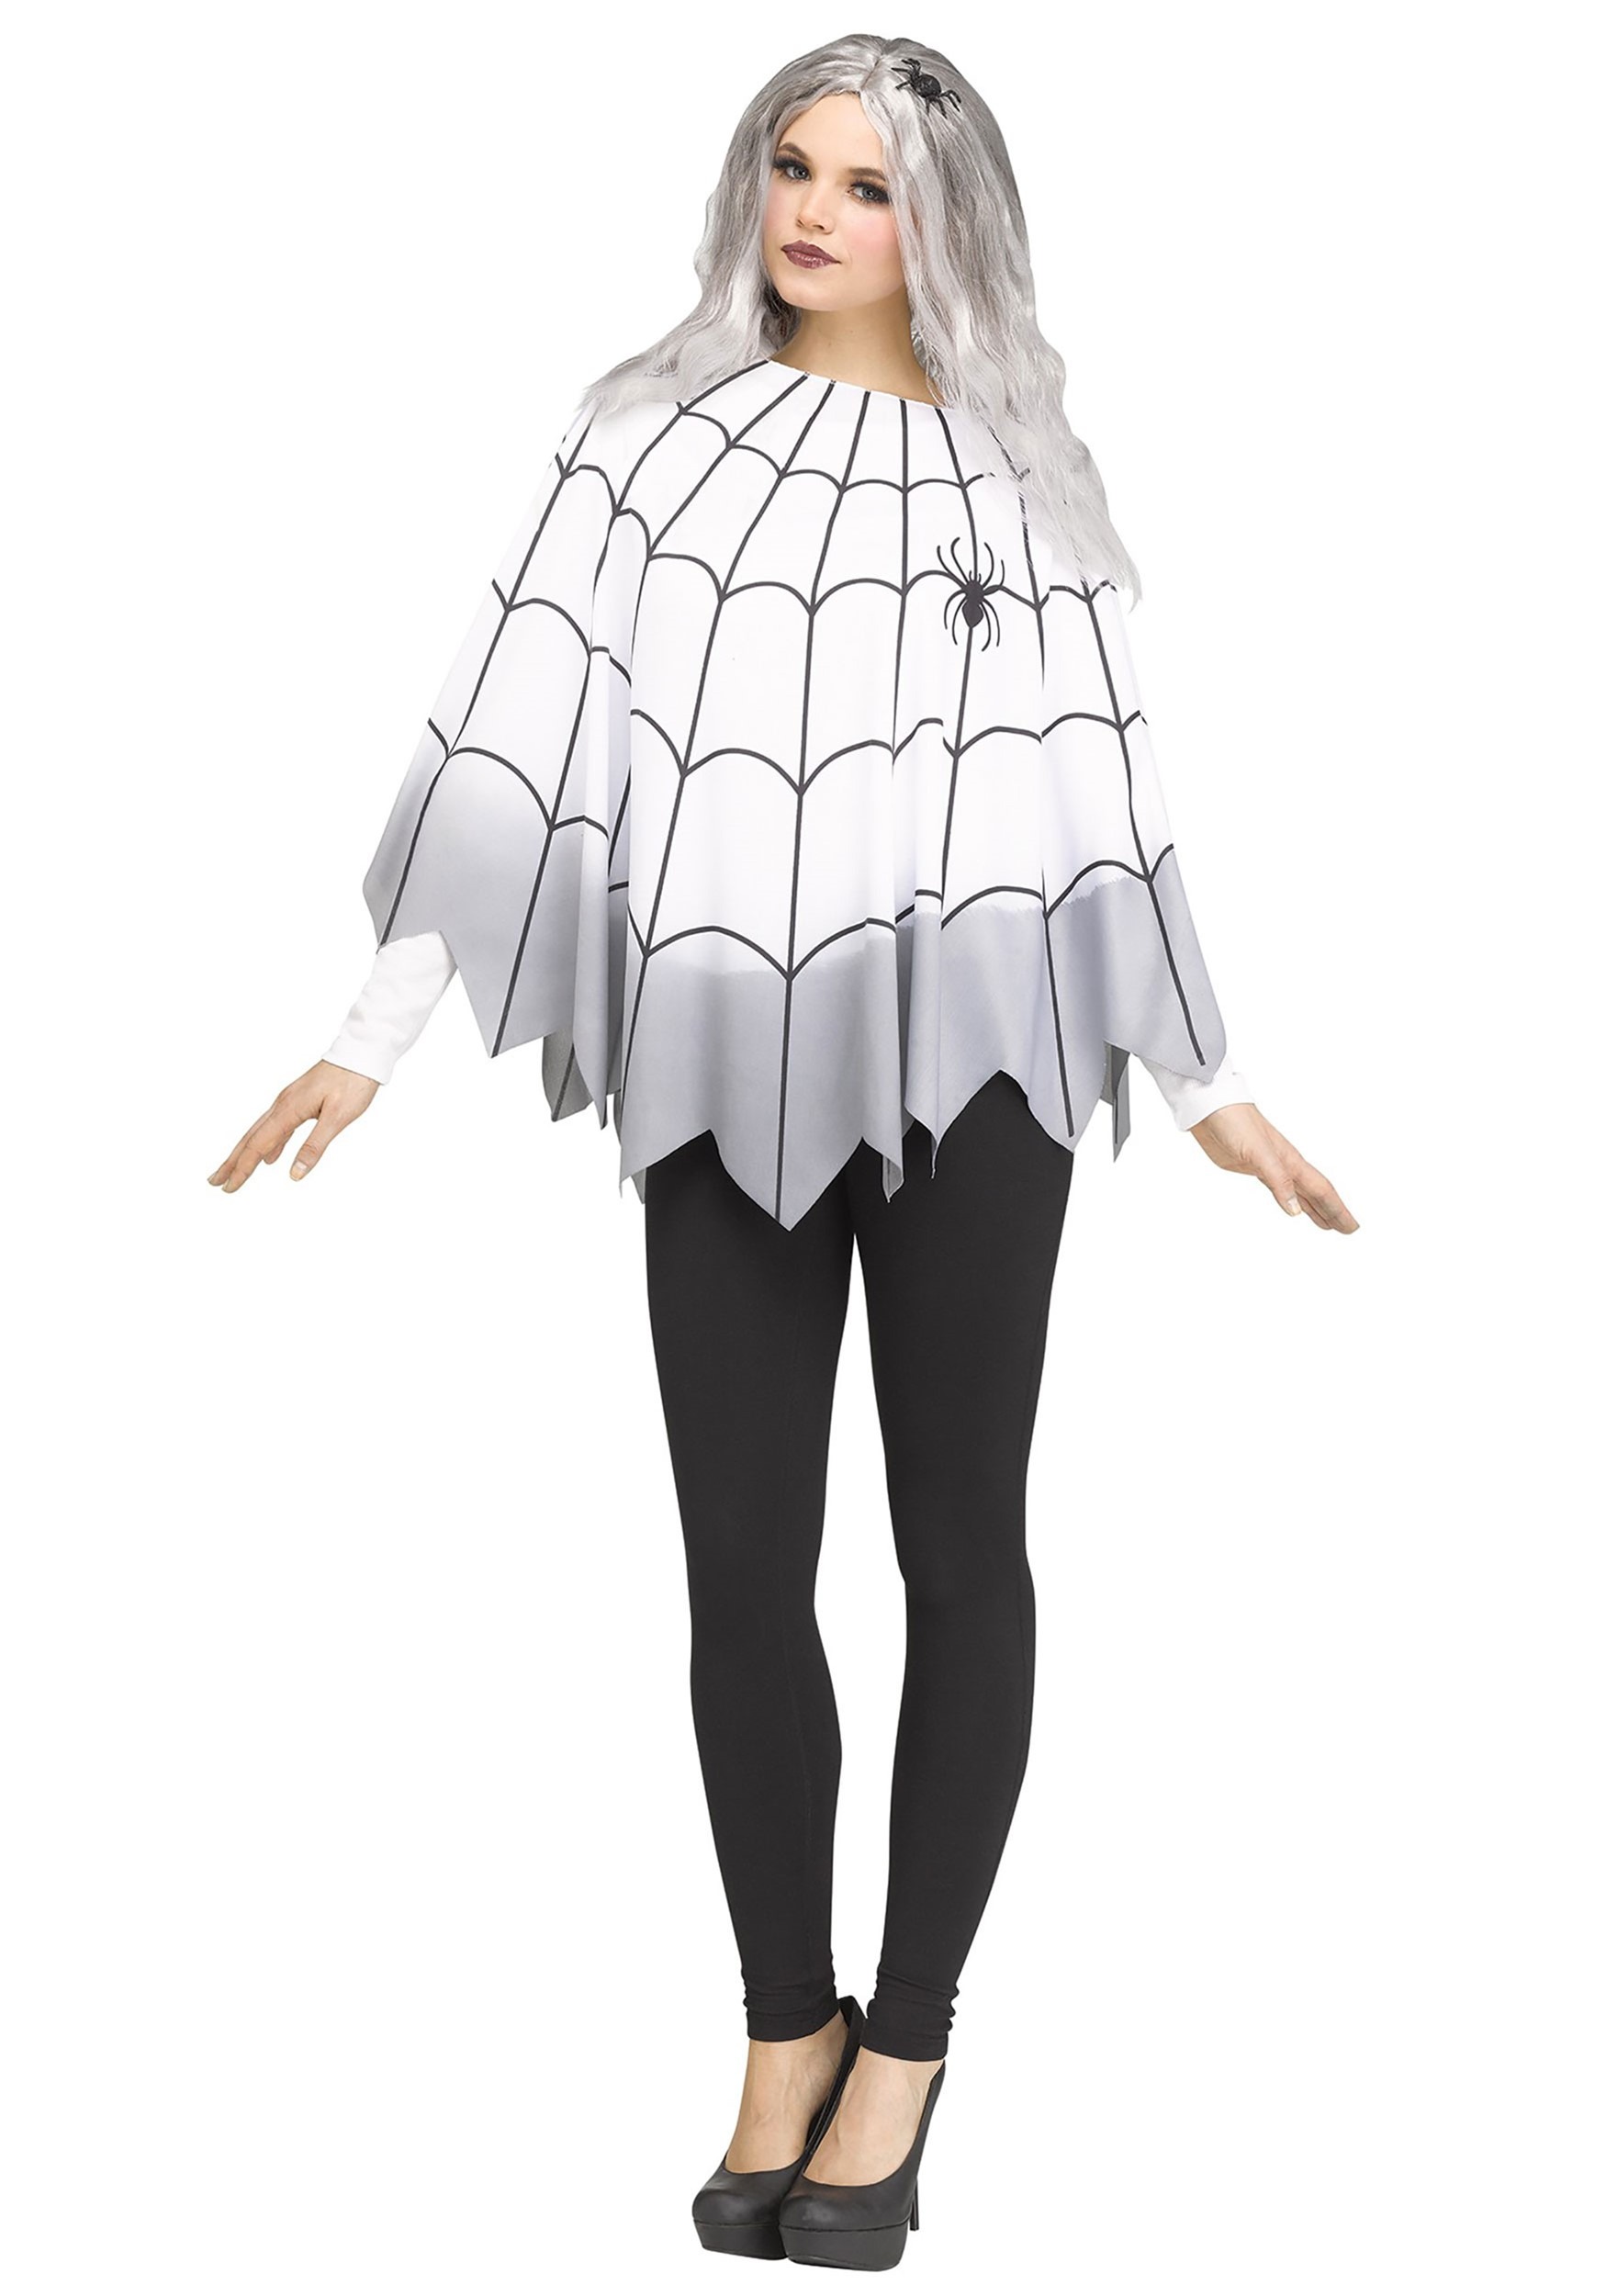 Womens Adult SPIDER WEB PONCHO with Purple Web on Black Costume.